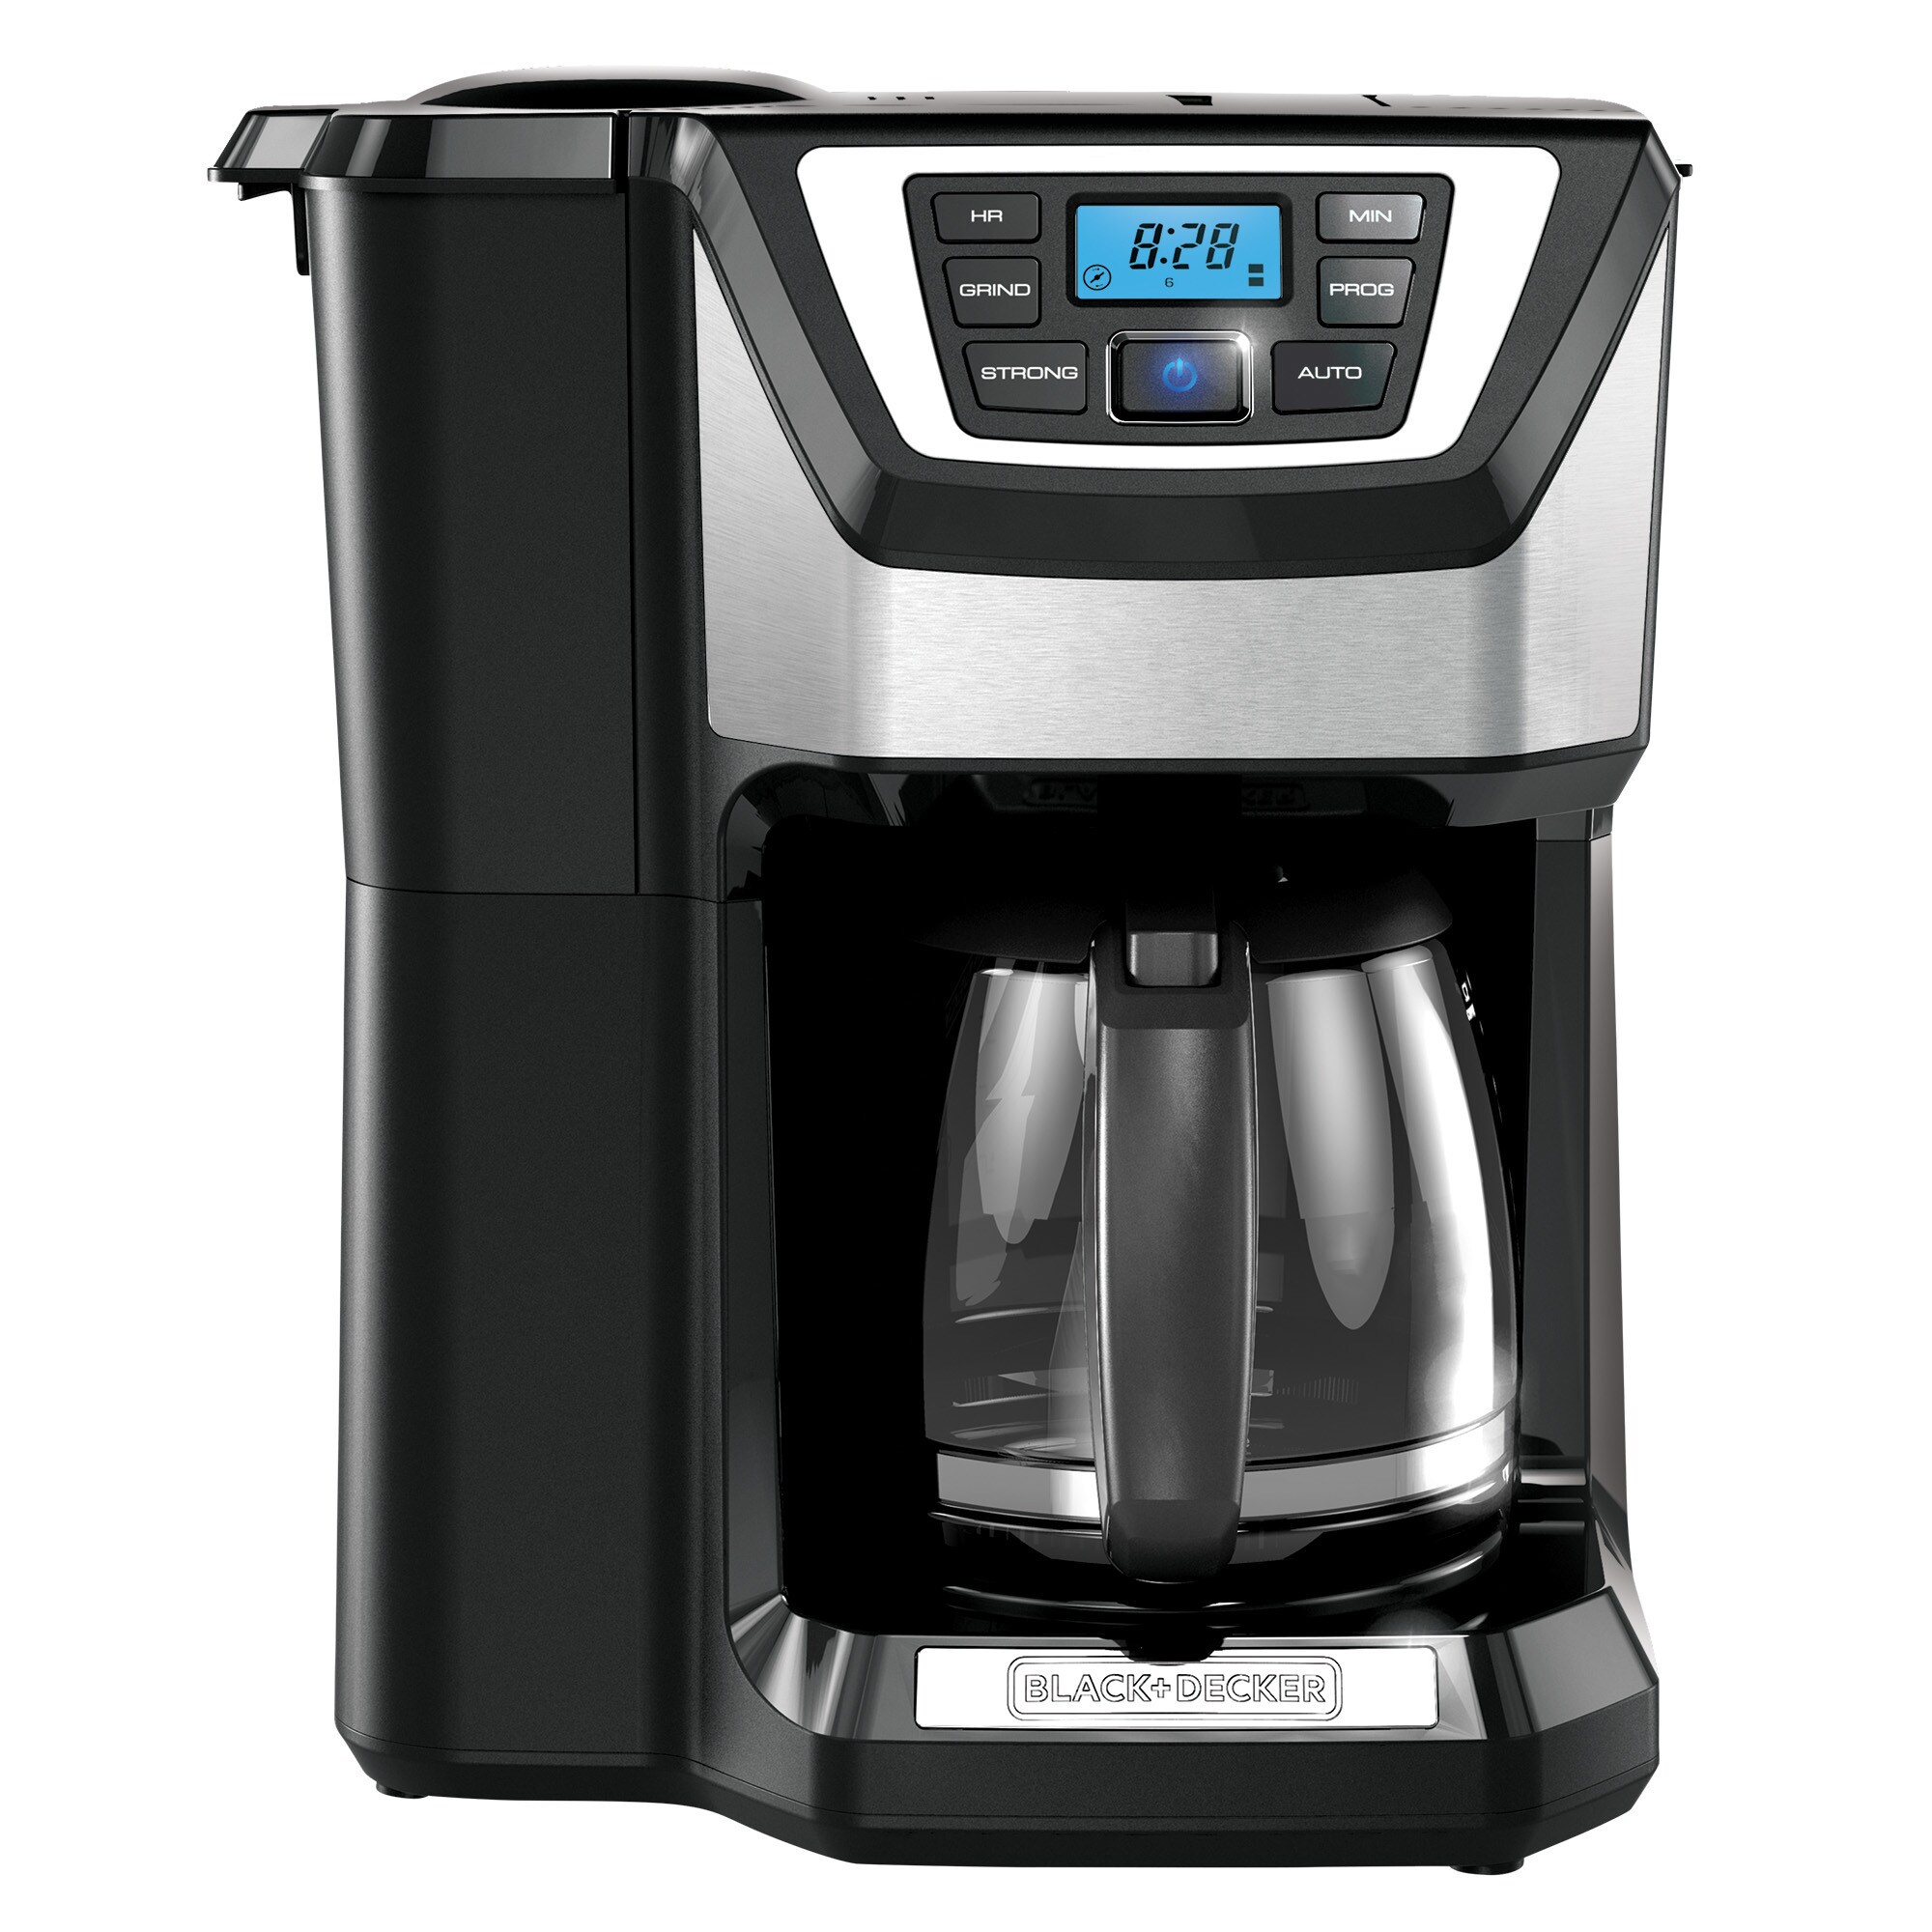 Black And Decker 12 Cup Programmable Coffee Maker In Gray : Target